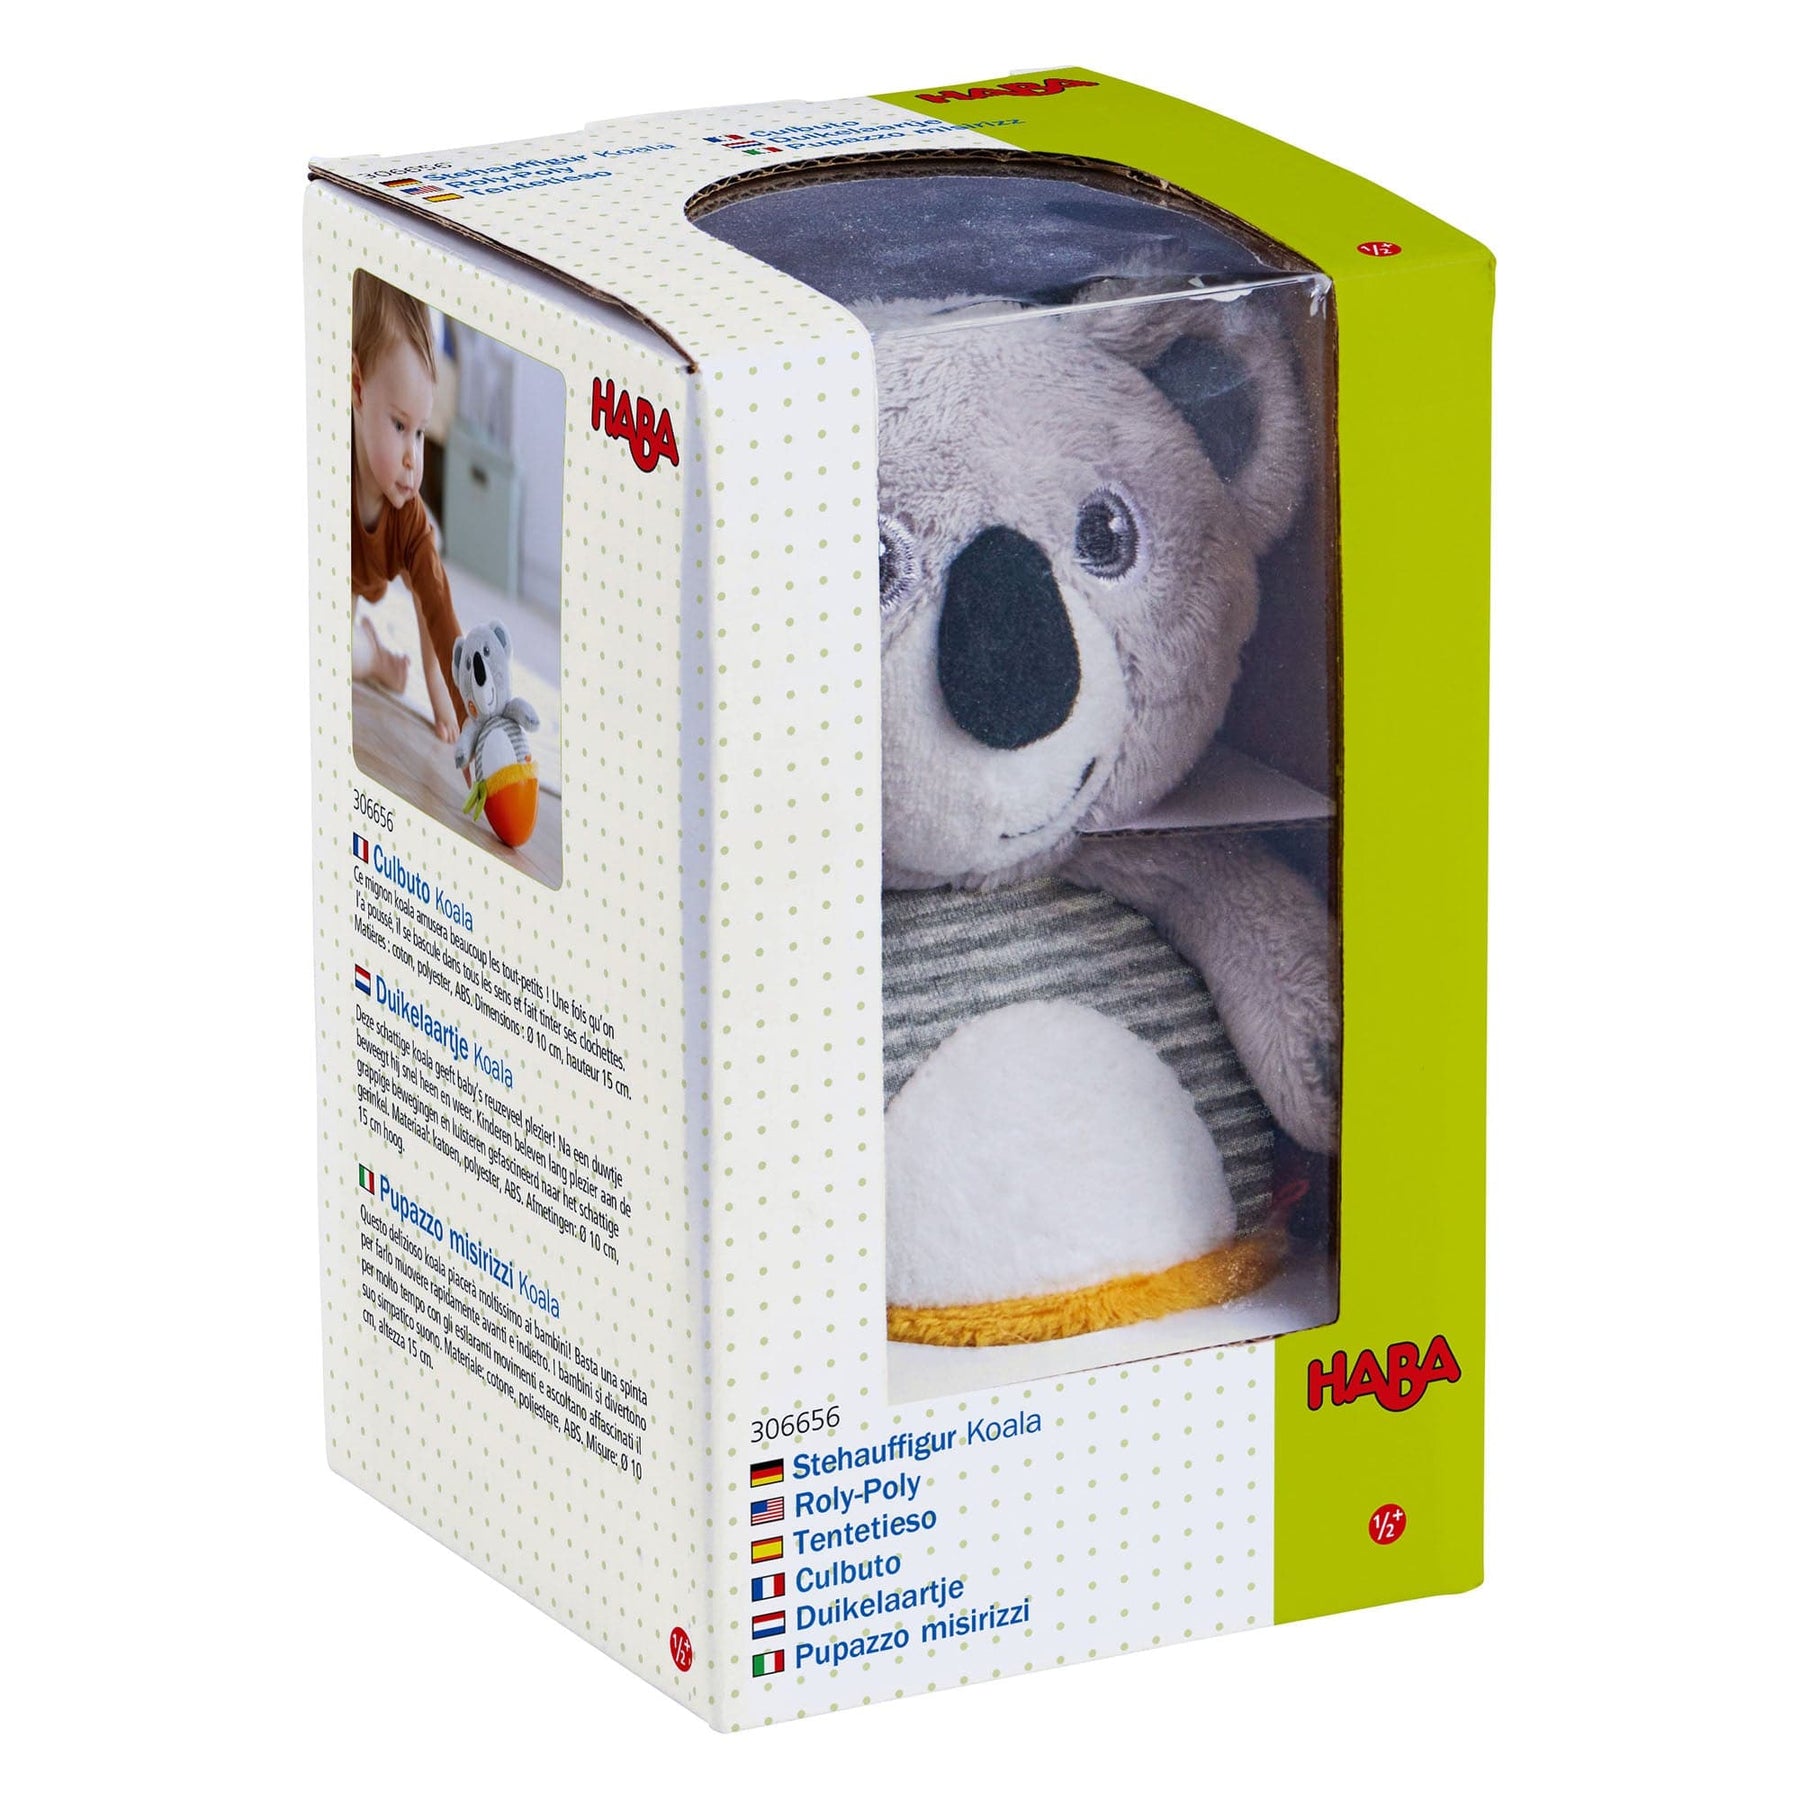 The Roly Poly toys Penguin & Koala are certainly up there in the